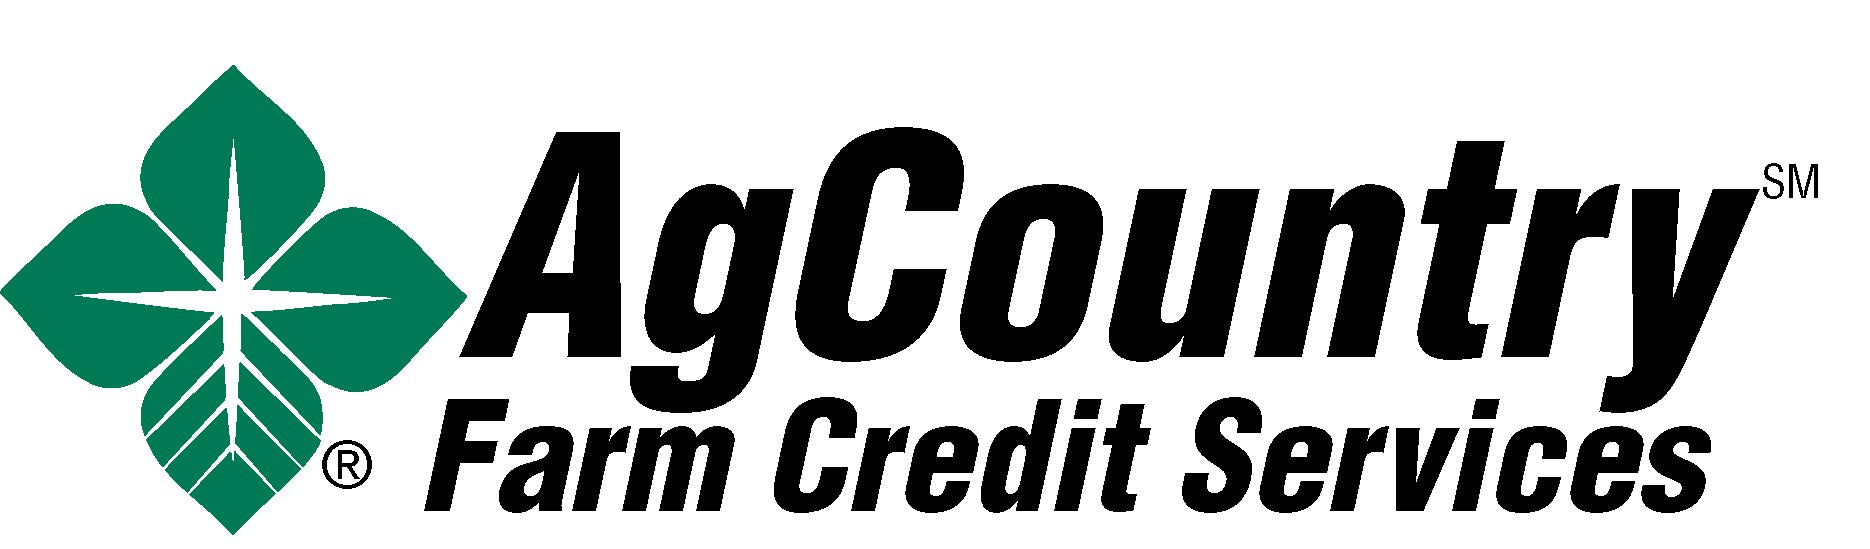 AgCountry Farm Credit Service Slide Image